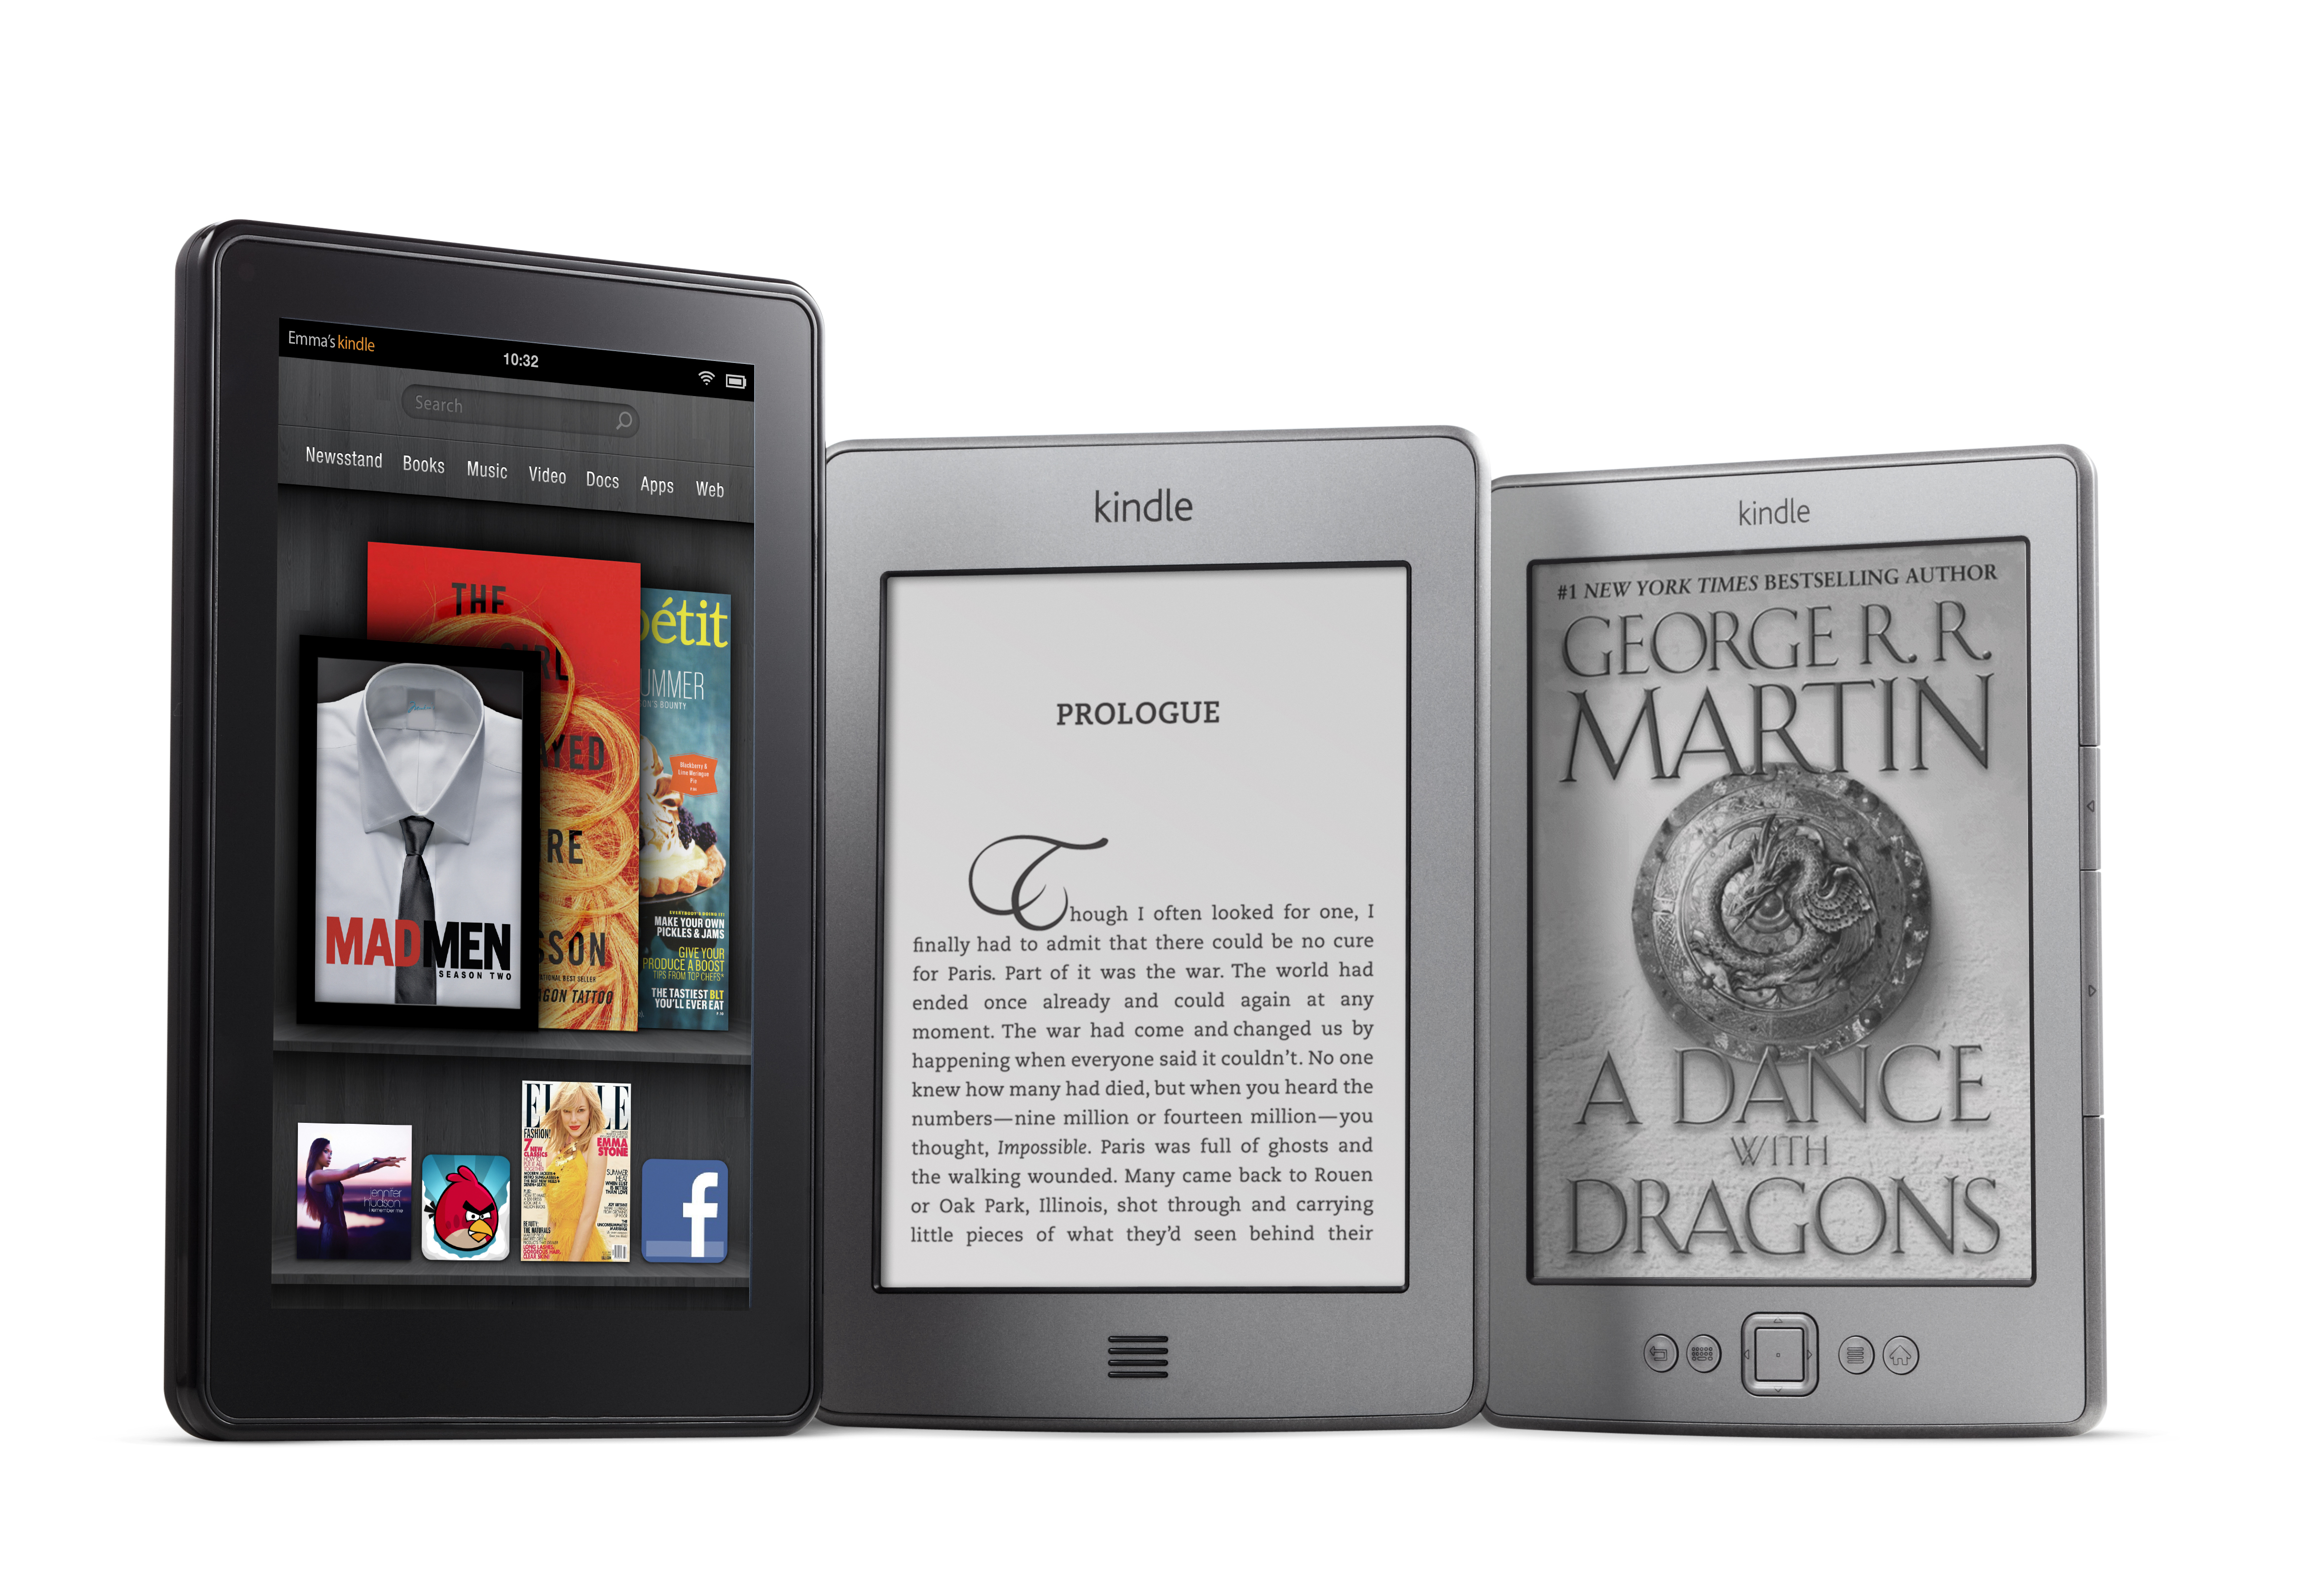 Amazon Launches Four New Kindles Fire, Touch, Touch 3G